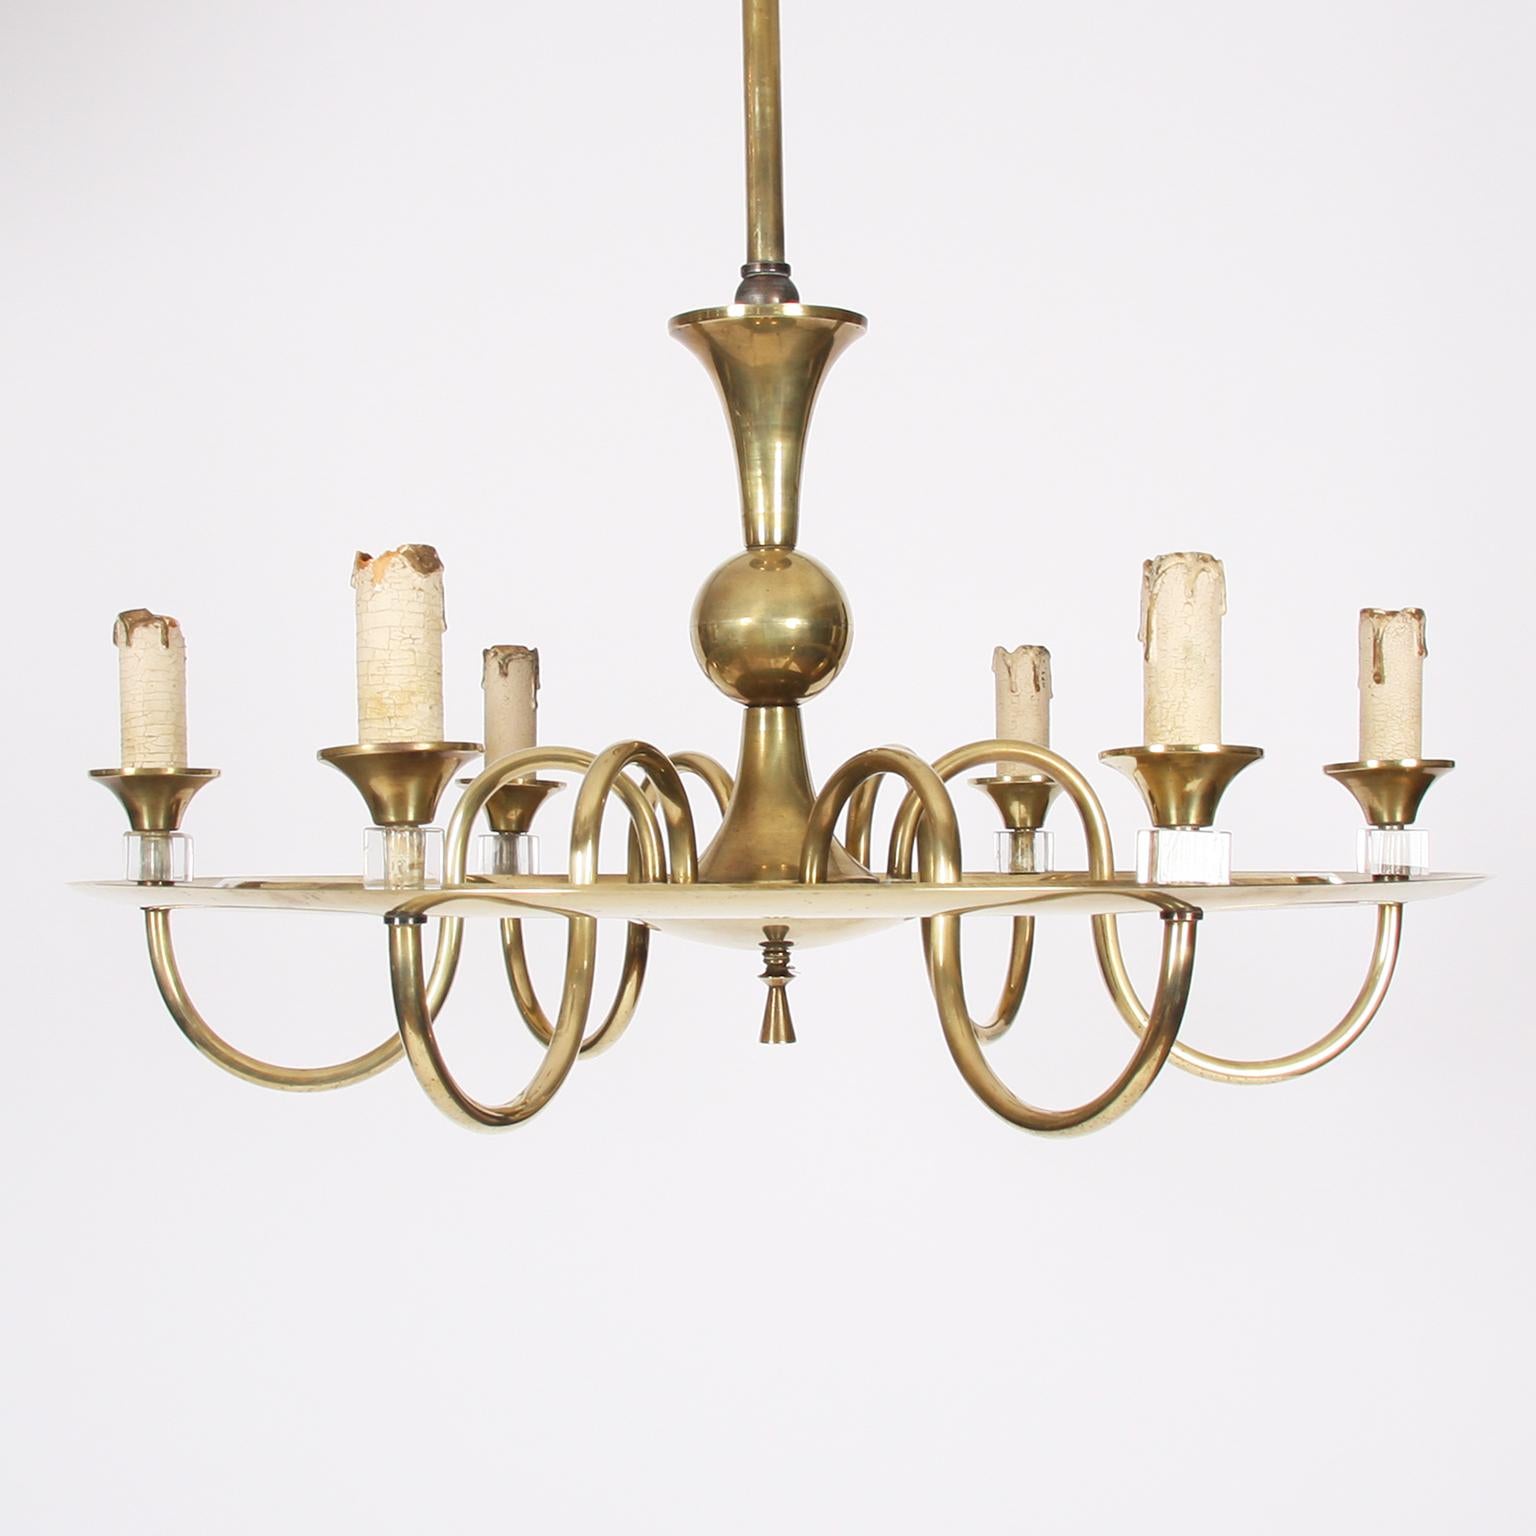 French, mid-20th century

A simple, and elegant, brass hoop chandelier.
 